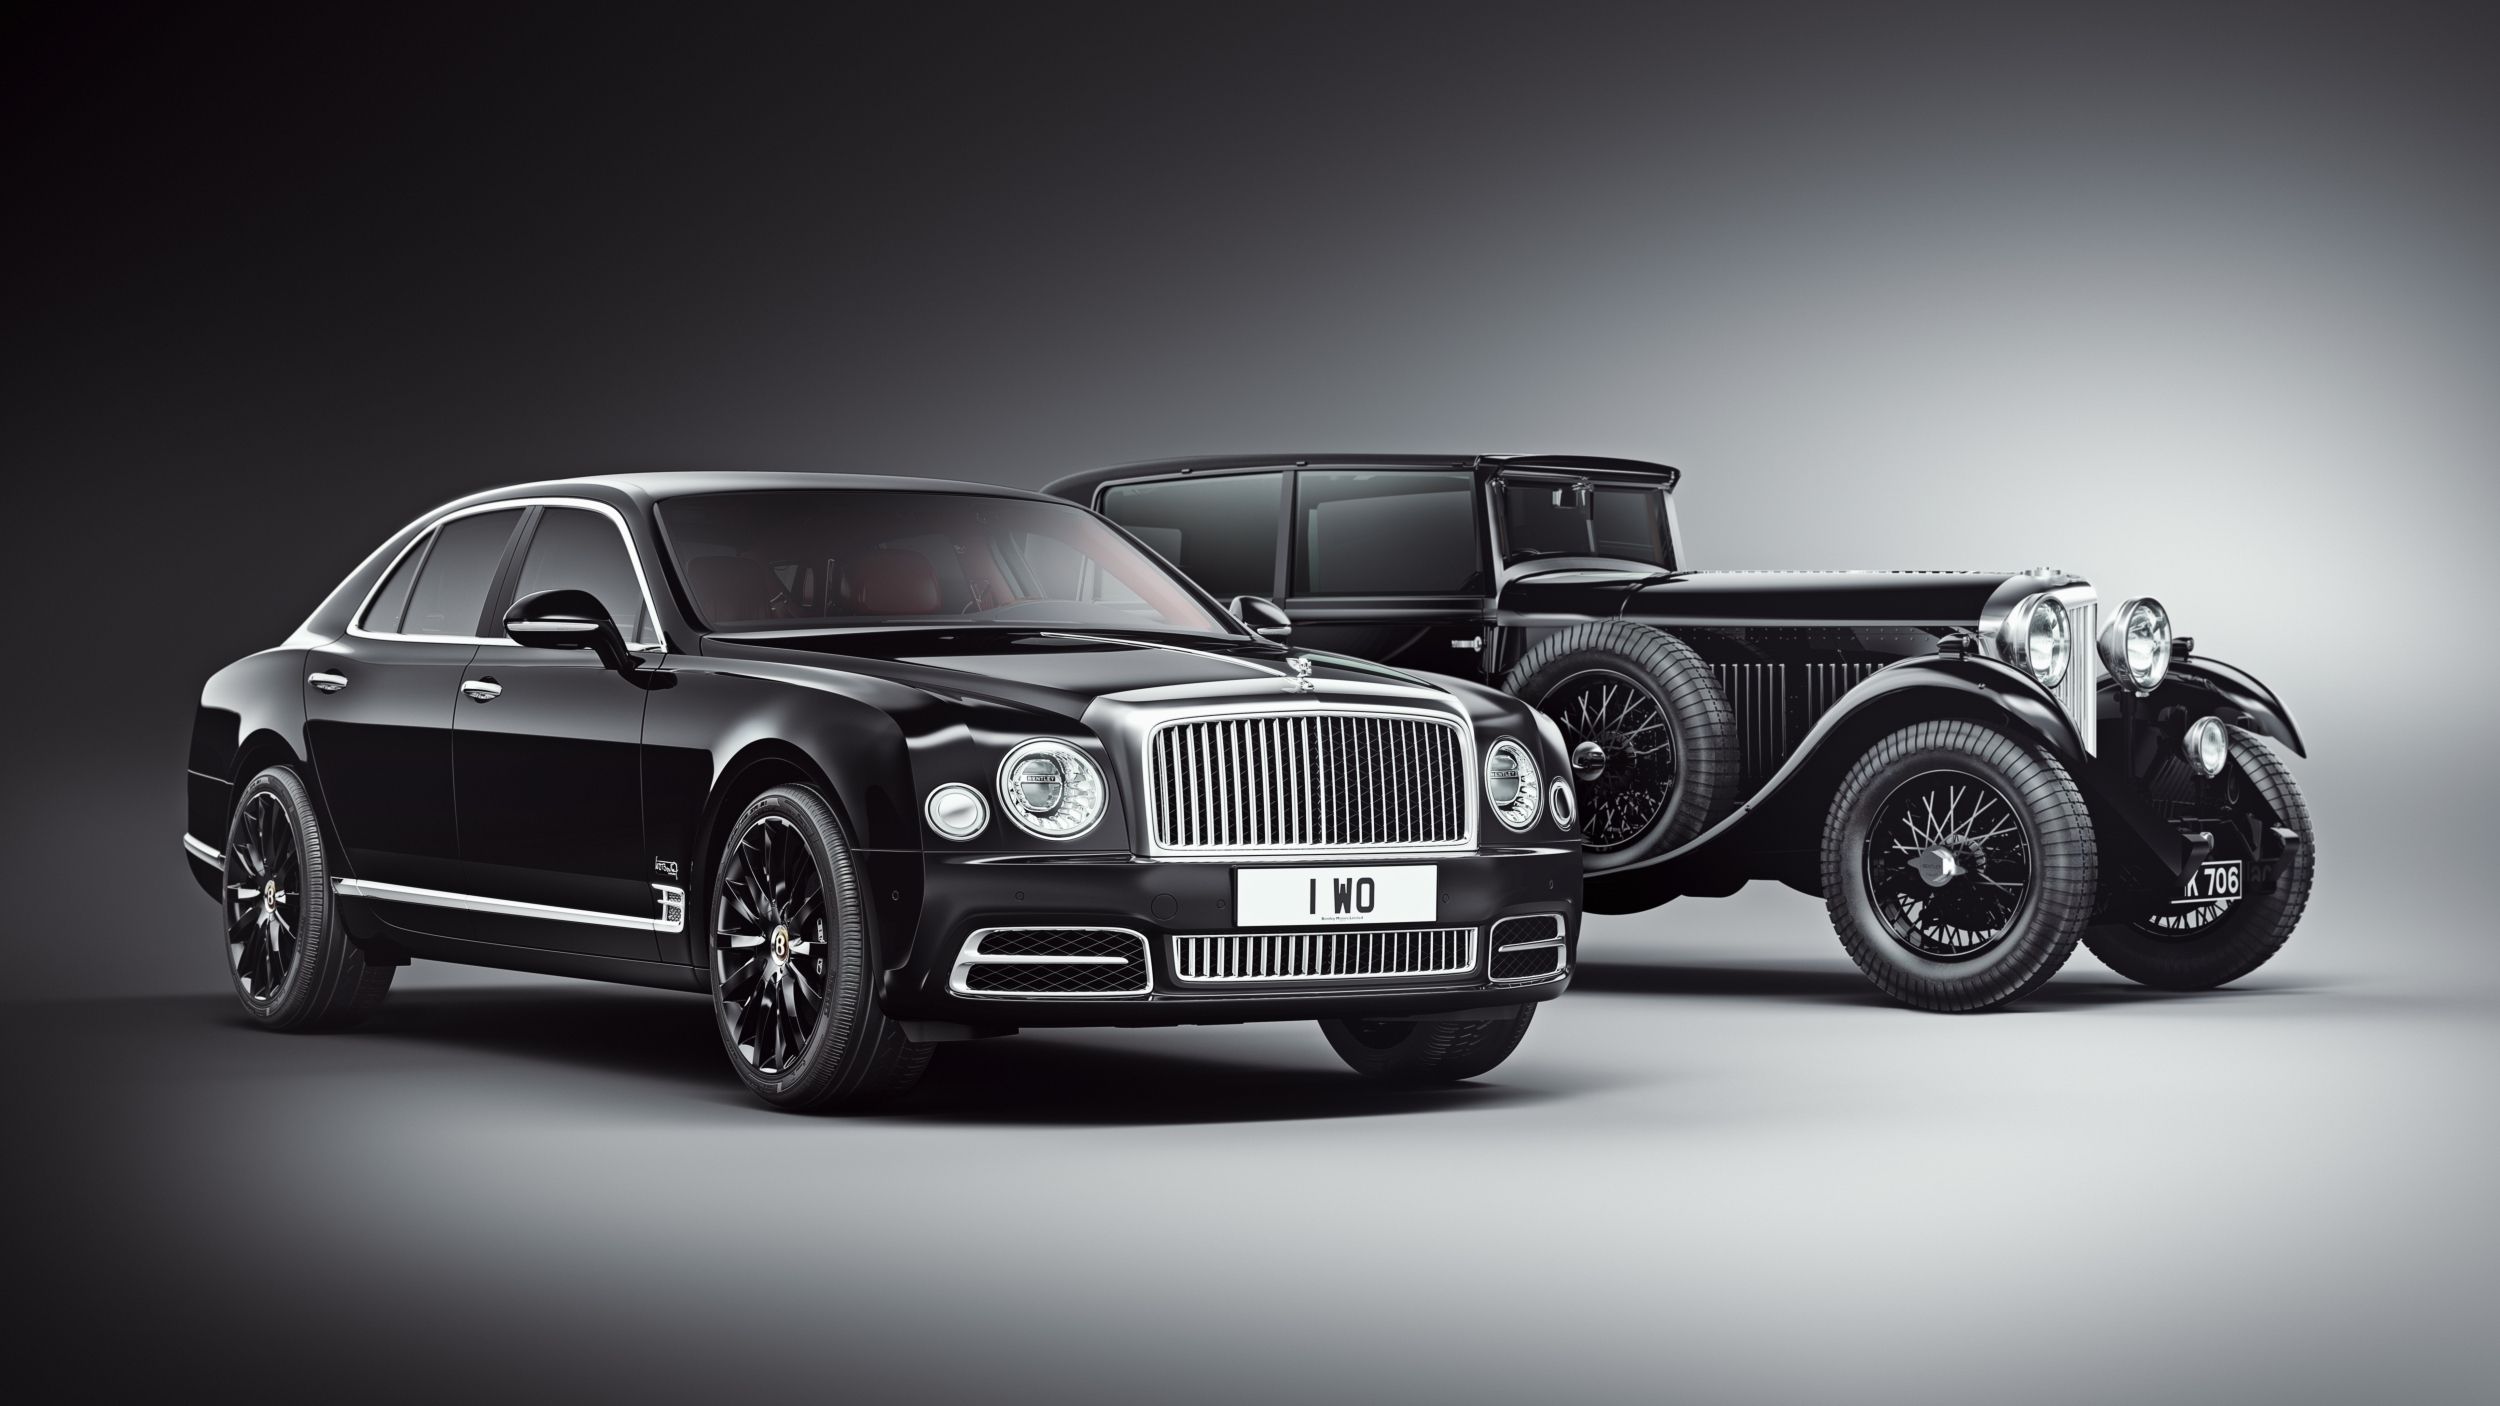 Bentley To Celebrate Centenary With A Founder’s Edition Of Mulsanne